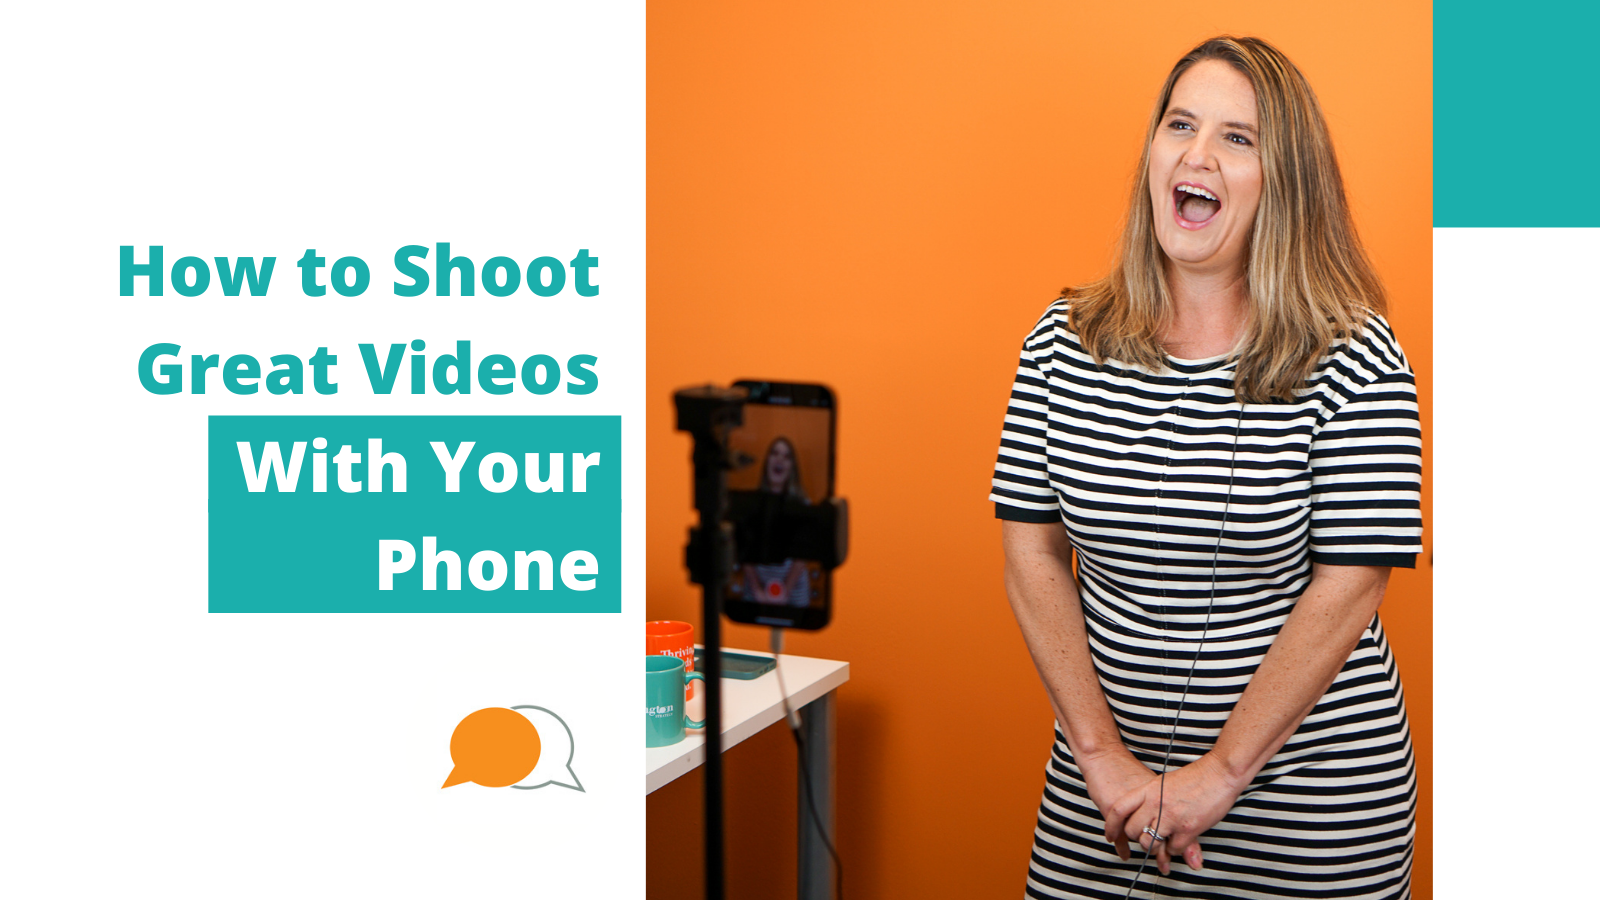 How to Shoot Great Videos with Your Phone  - Arlington Strategy